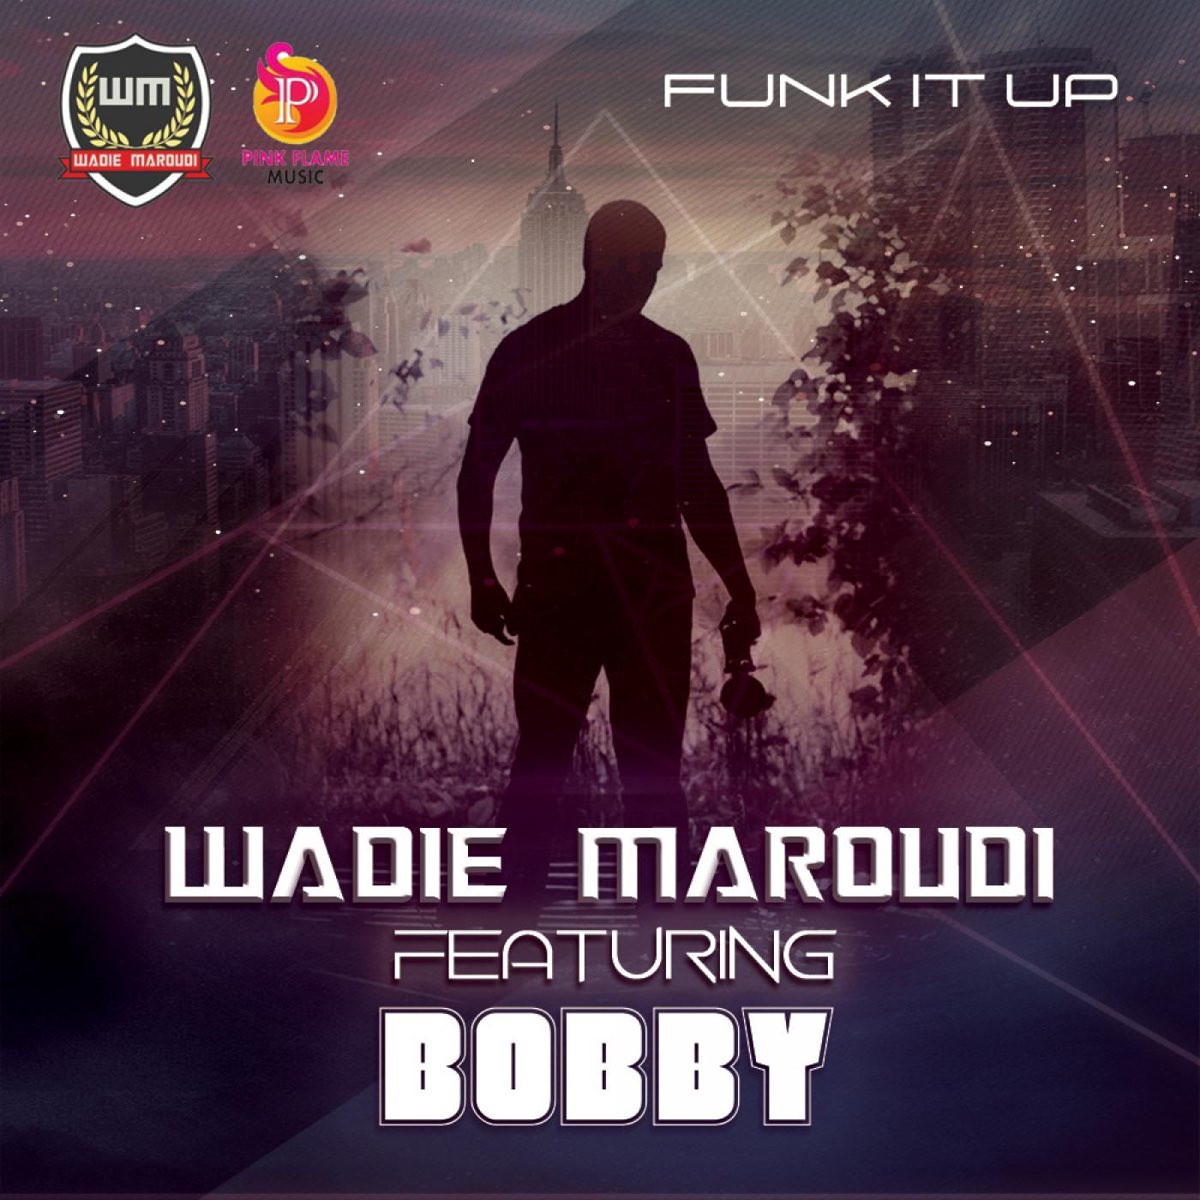 Bobby Funk. Funk it up. Up 2 me Music. Feat bobby